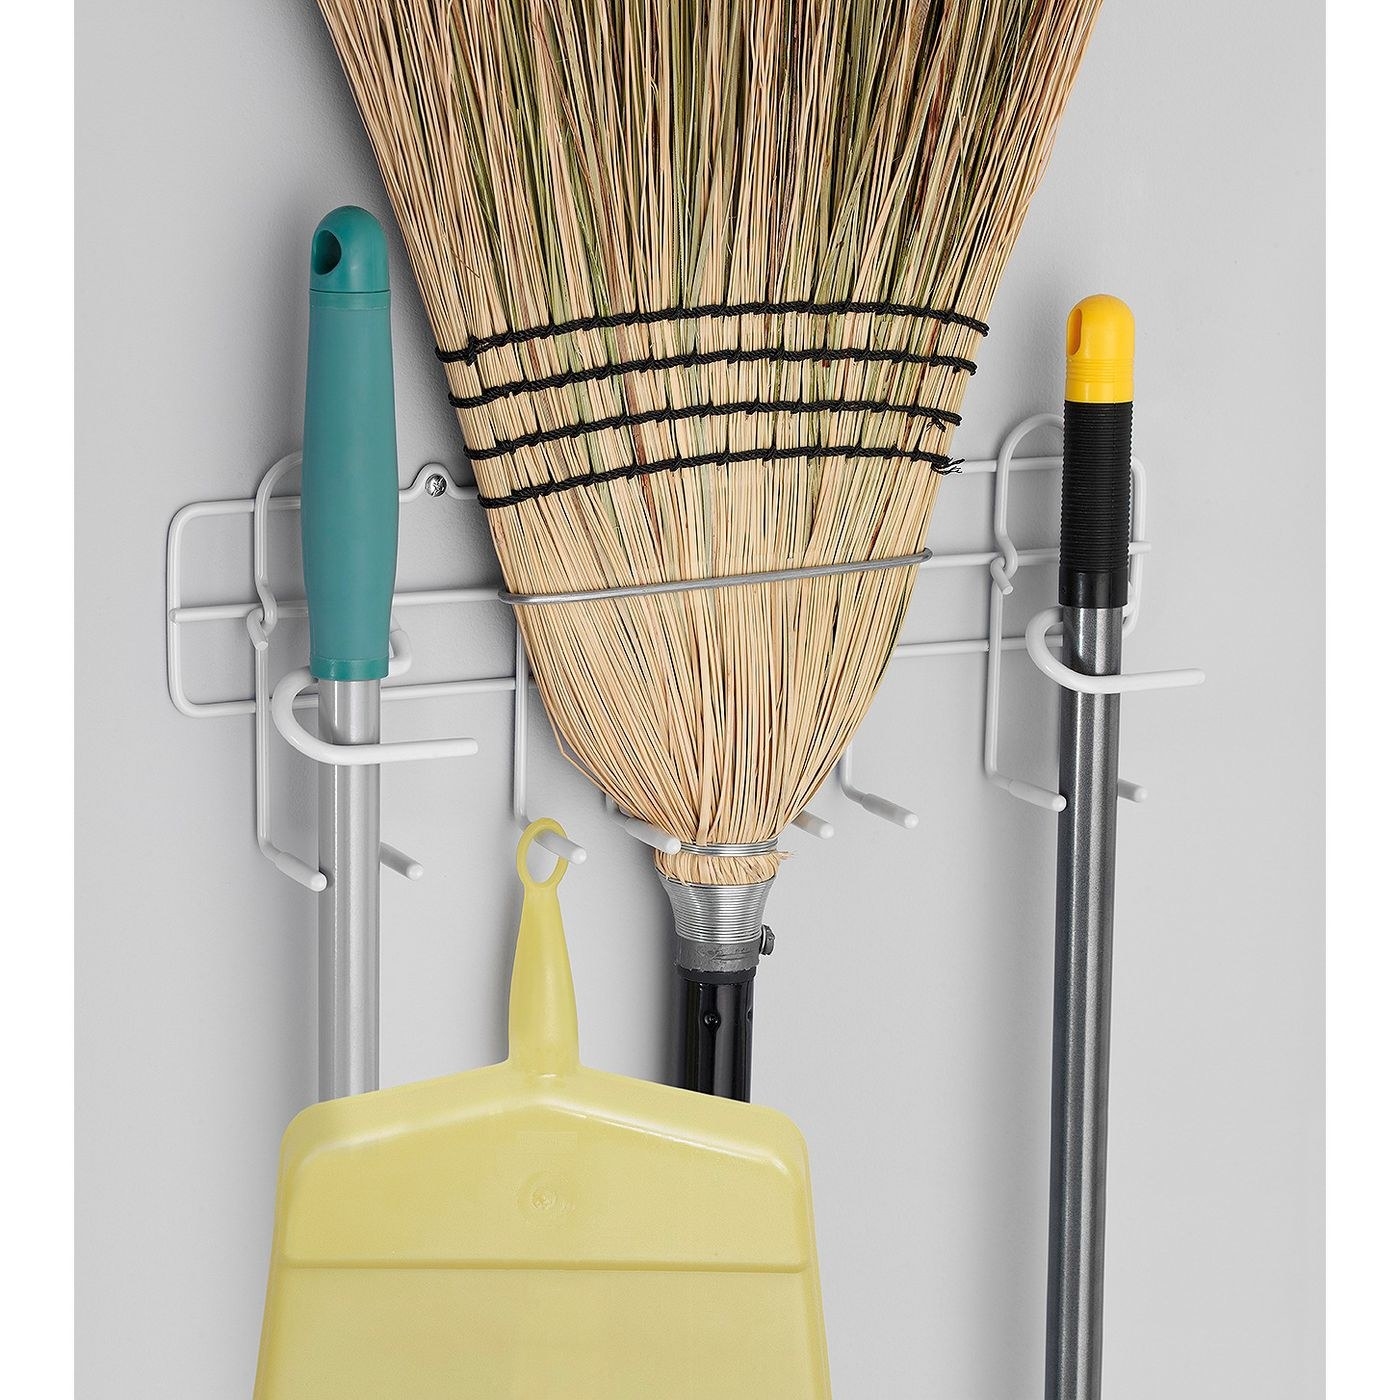 several brooms and dustpans hung on the white wire rack